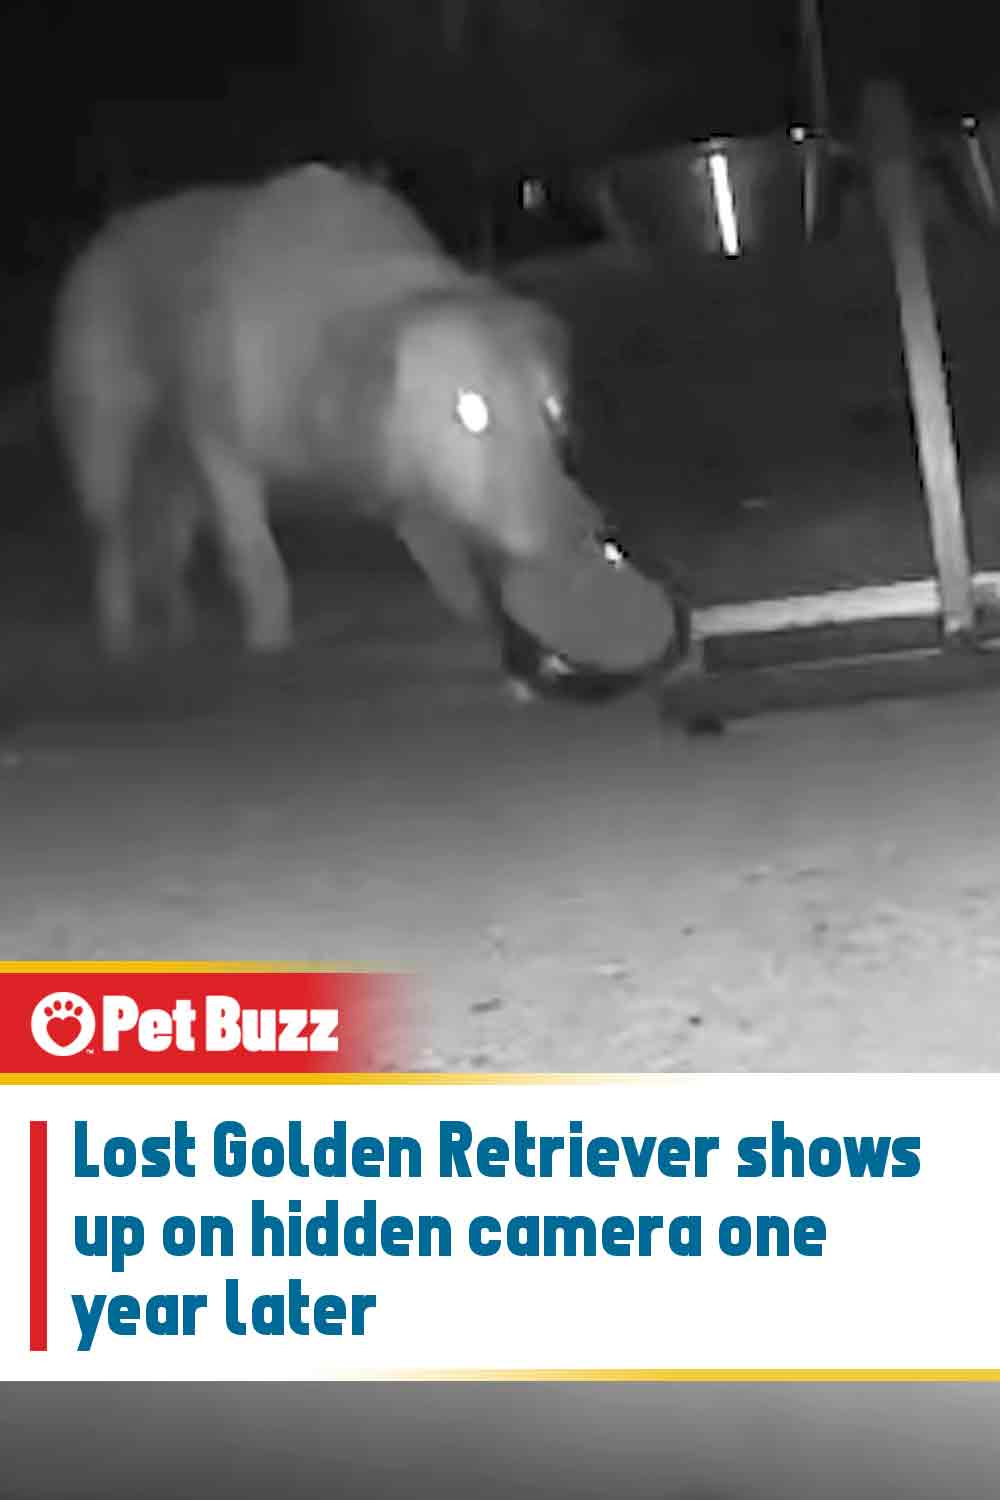 Lost Golden Retriever shows up on hidden camera one year later